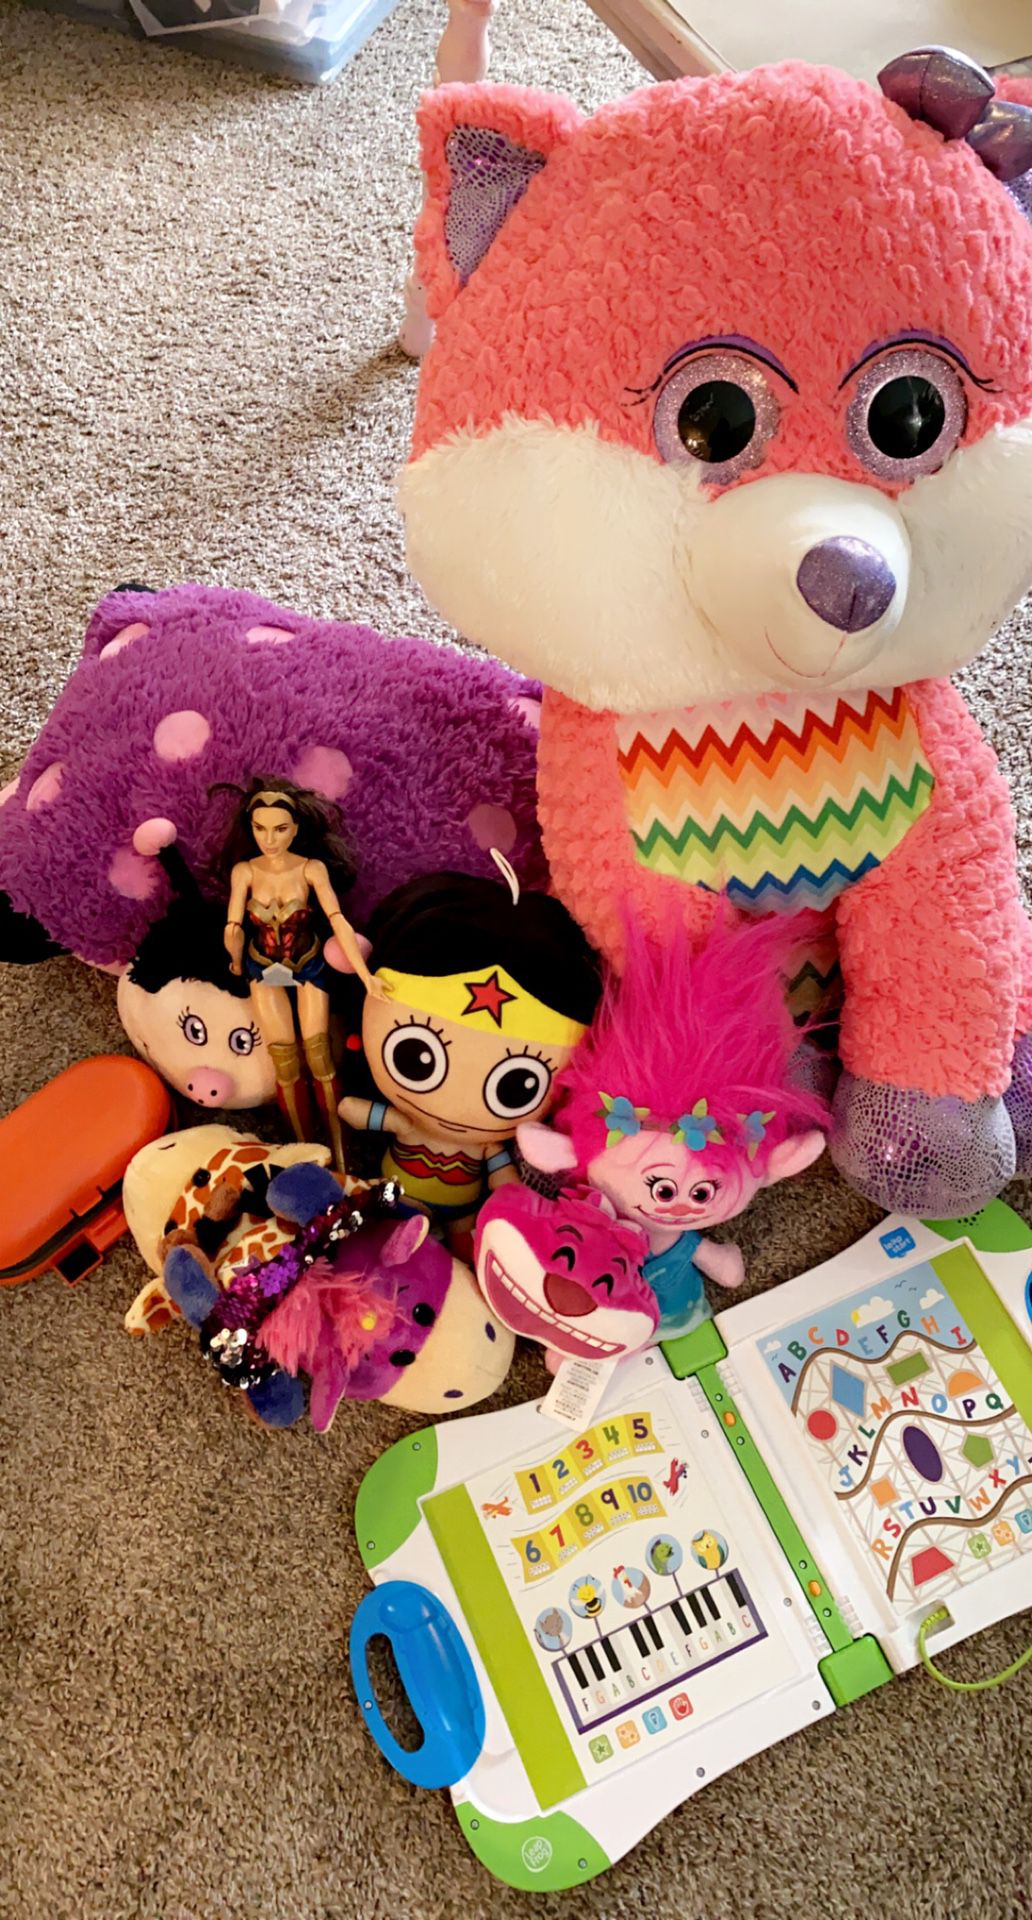 Stuffed animals and toys lot